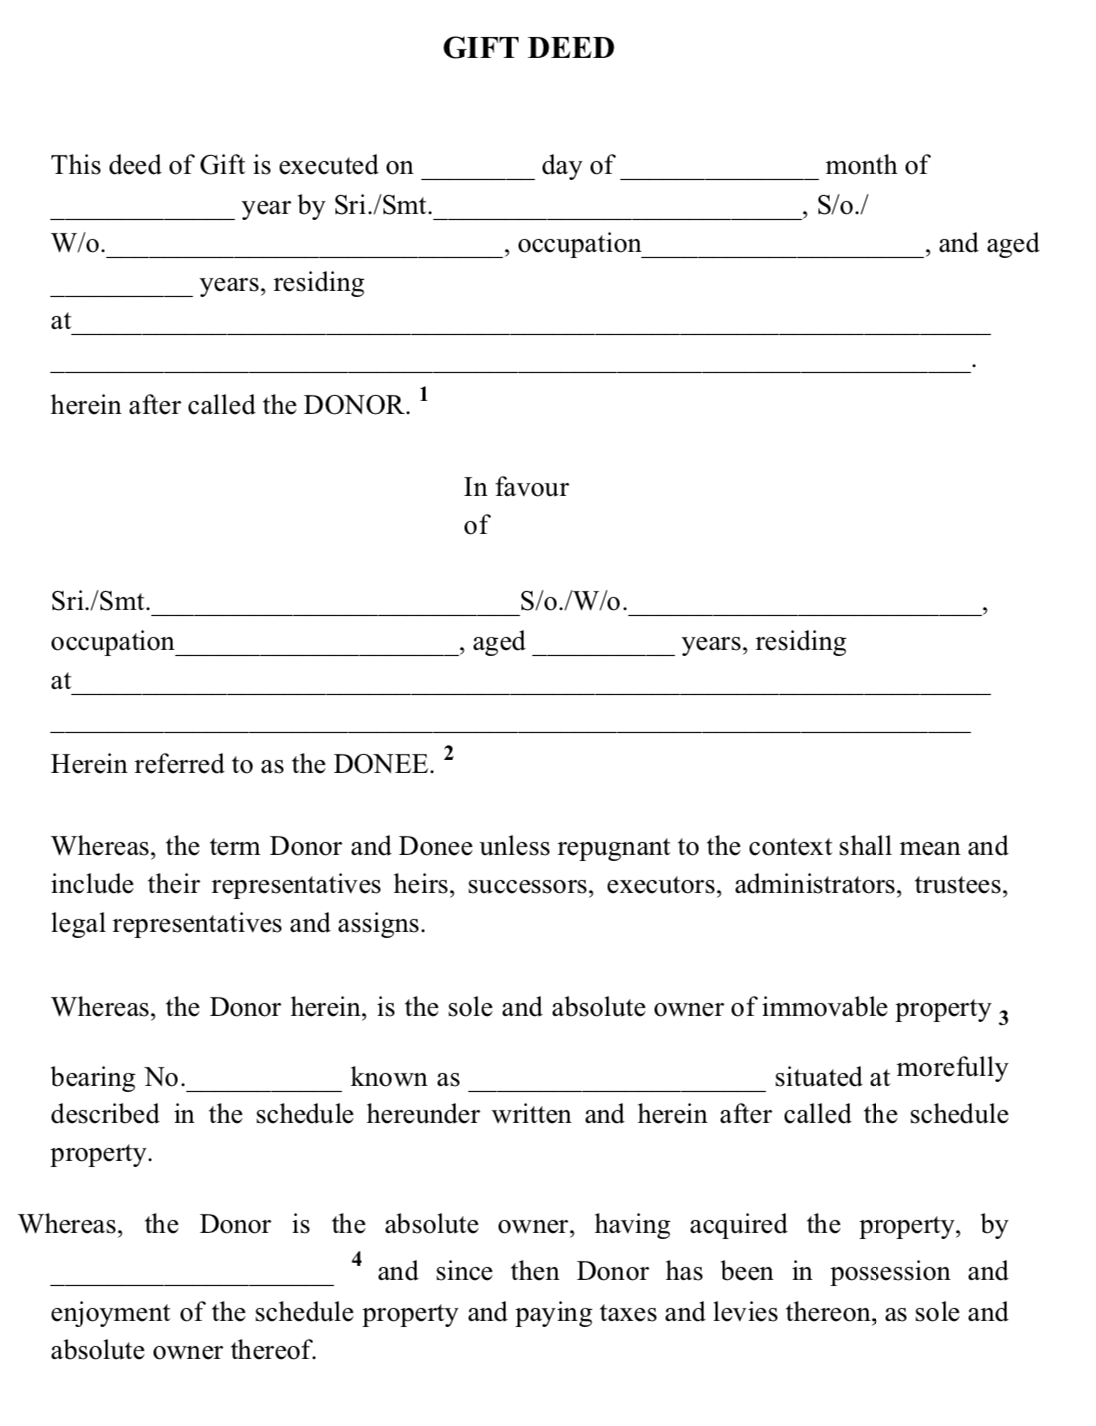 Sample Format of a Gift Deed